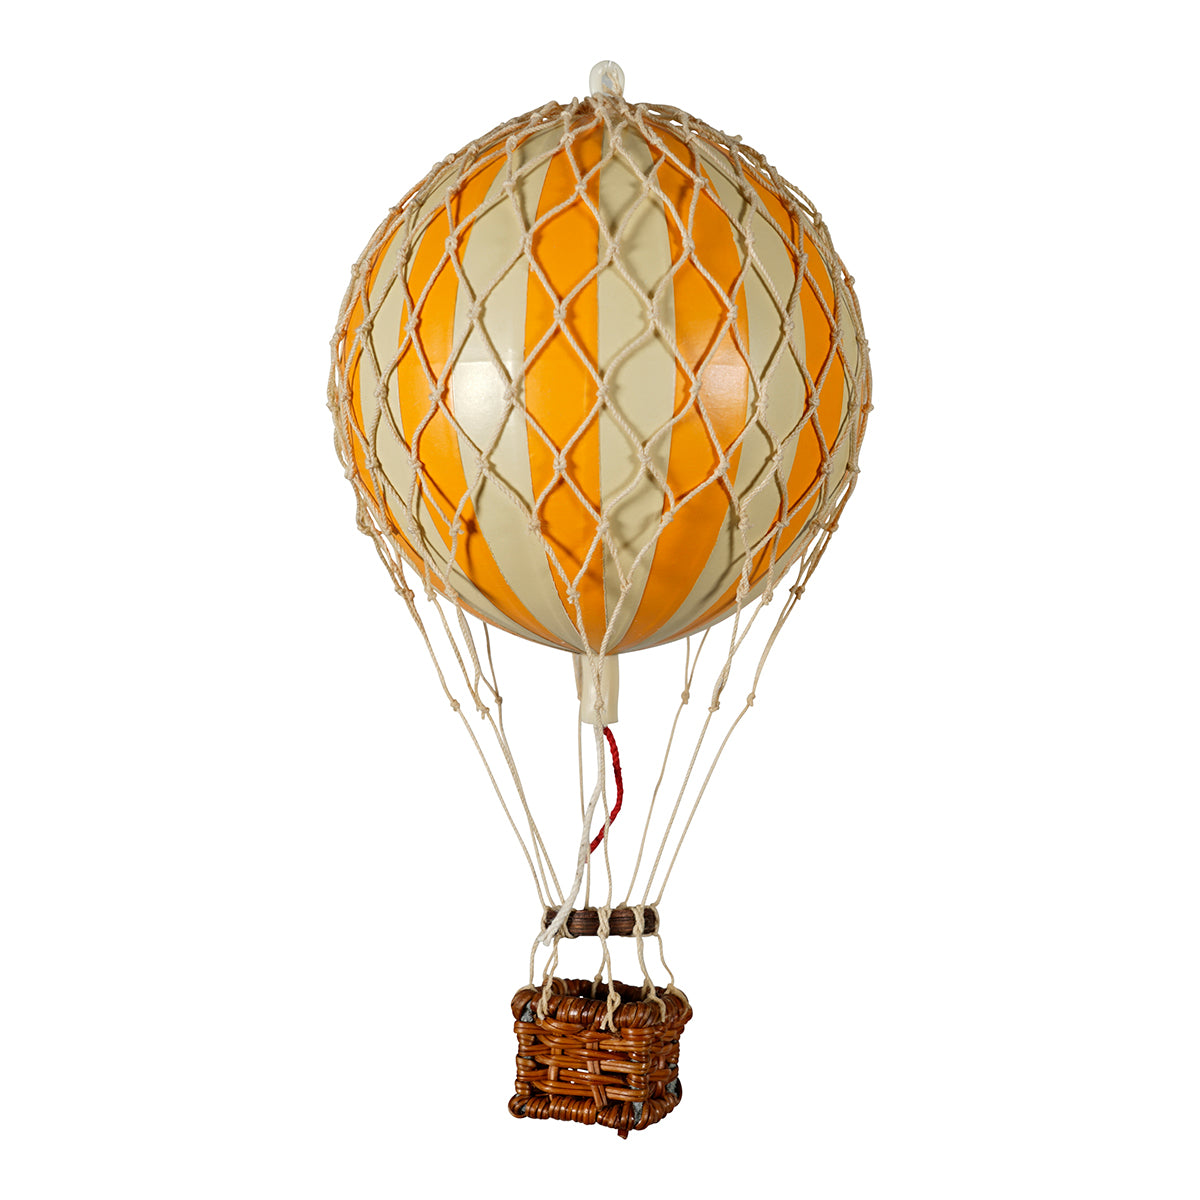 A whimsical Wonderen Extra Small Hot Air Balloon - Floating The Skies on a white background.